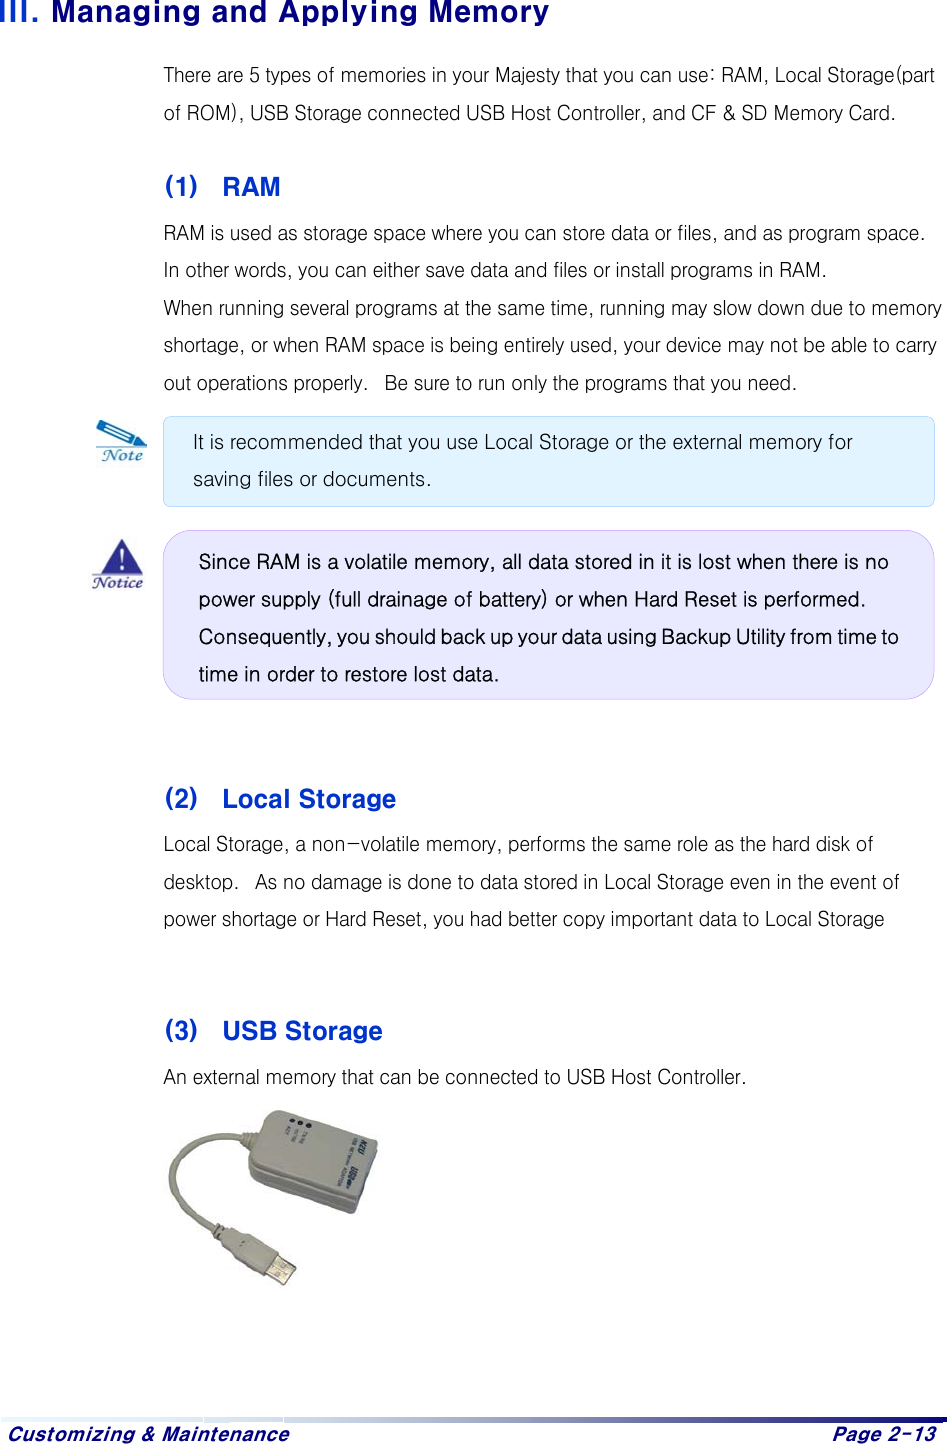   Customizing &amp; Maintenance    Page 2-13   III. Managing and Applying Memory There are 5 types of memories in your Majesty that you can use: RAM, Local Storage(part of ROM), USB Storage connected USB Host Controller, and CF &amp; SD Memory Card.  (1)  RAM RAM is used as storage space where you can store data or files, and as program space.  In other words, you can either save data and files or install programs in RAM.  When running several programs at the same time, running may slow down due to memory shortage, or when RAM space is being entirely used, your device may not be able to carry out operations properly.   Be sure to run only the programs that you need.            (2)  Local Storage Local Storage, a non-volatile memory, performs the same role as the hard disk of desktop.   As no damage is done to data stored in Local Storage even in the event of power shortage or Hard Reset, you had better copy important data to Local Storage    (3)  USB Storage An external memory that can be connected to USB Host Controller.          It is recommended that you use Local Storage or the external memory for saving files or documents. Since RAM is a volatile memory, all data stored in it is lost when there is no power supply (full drainage of battery) or when Hard Reset is performed. Consequently, you should back up your data using Backup Utility from time to time in order to restore lost data.  